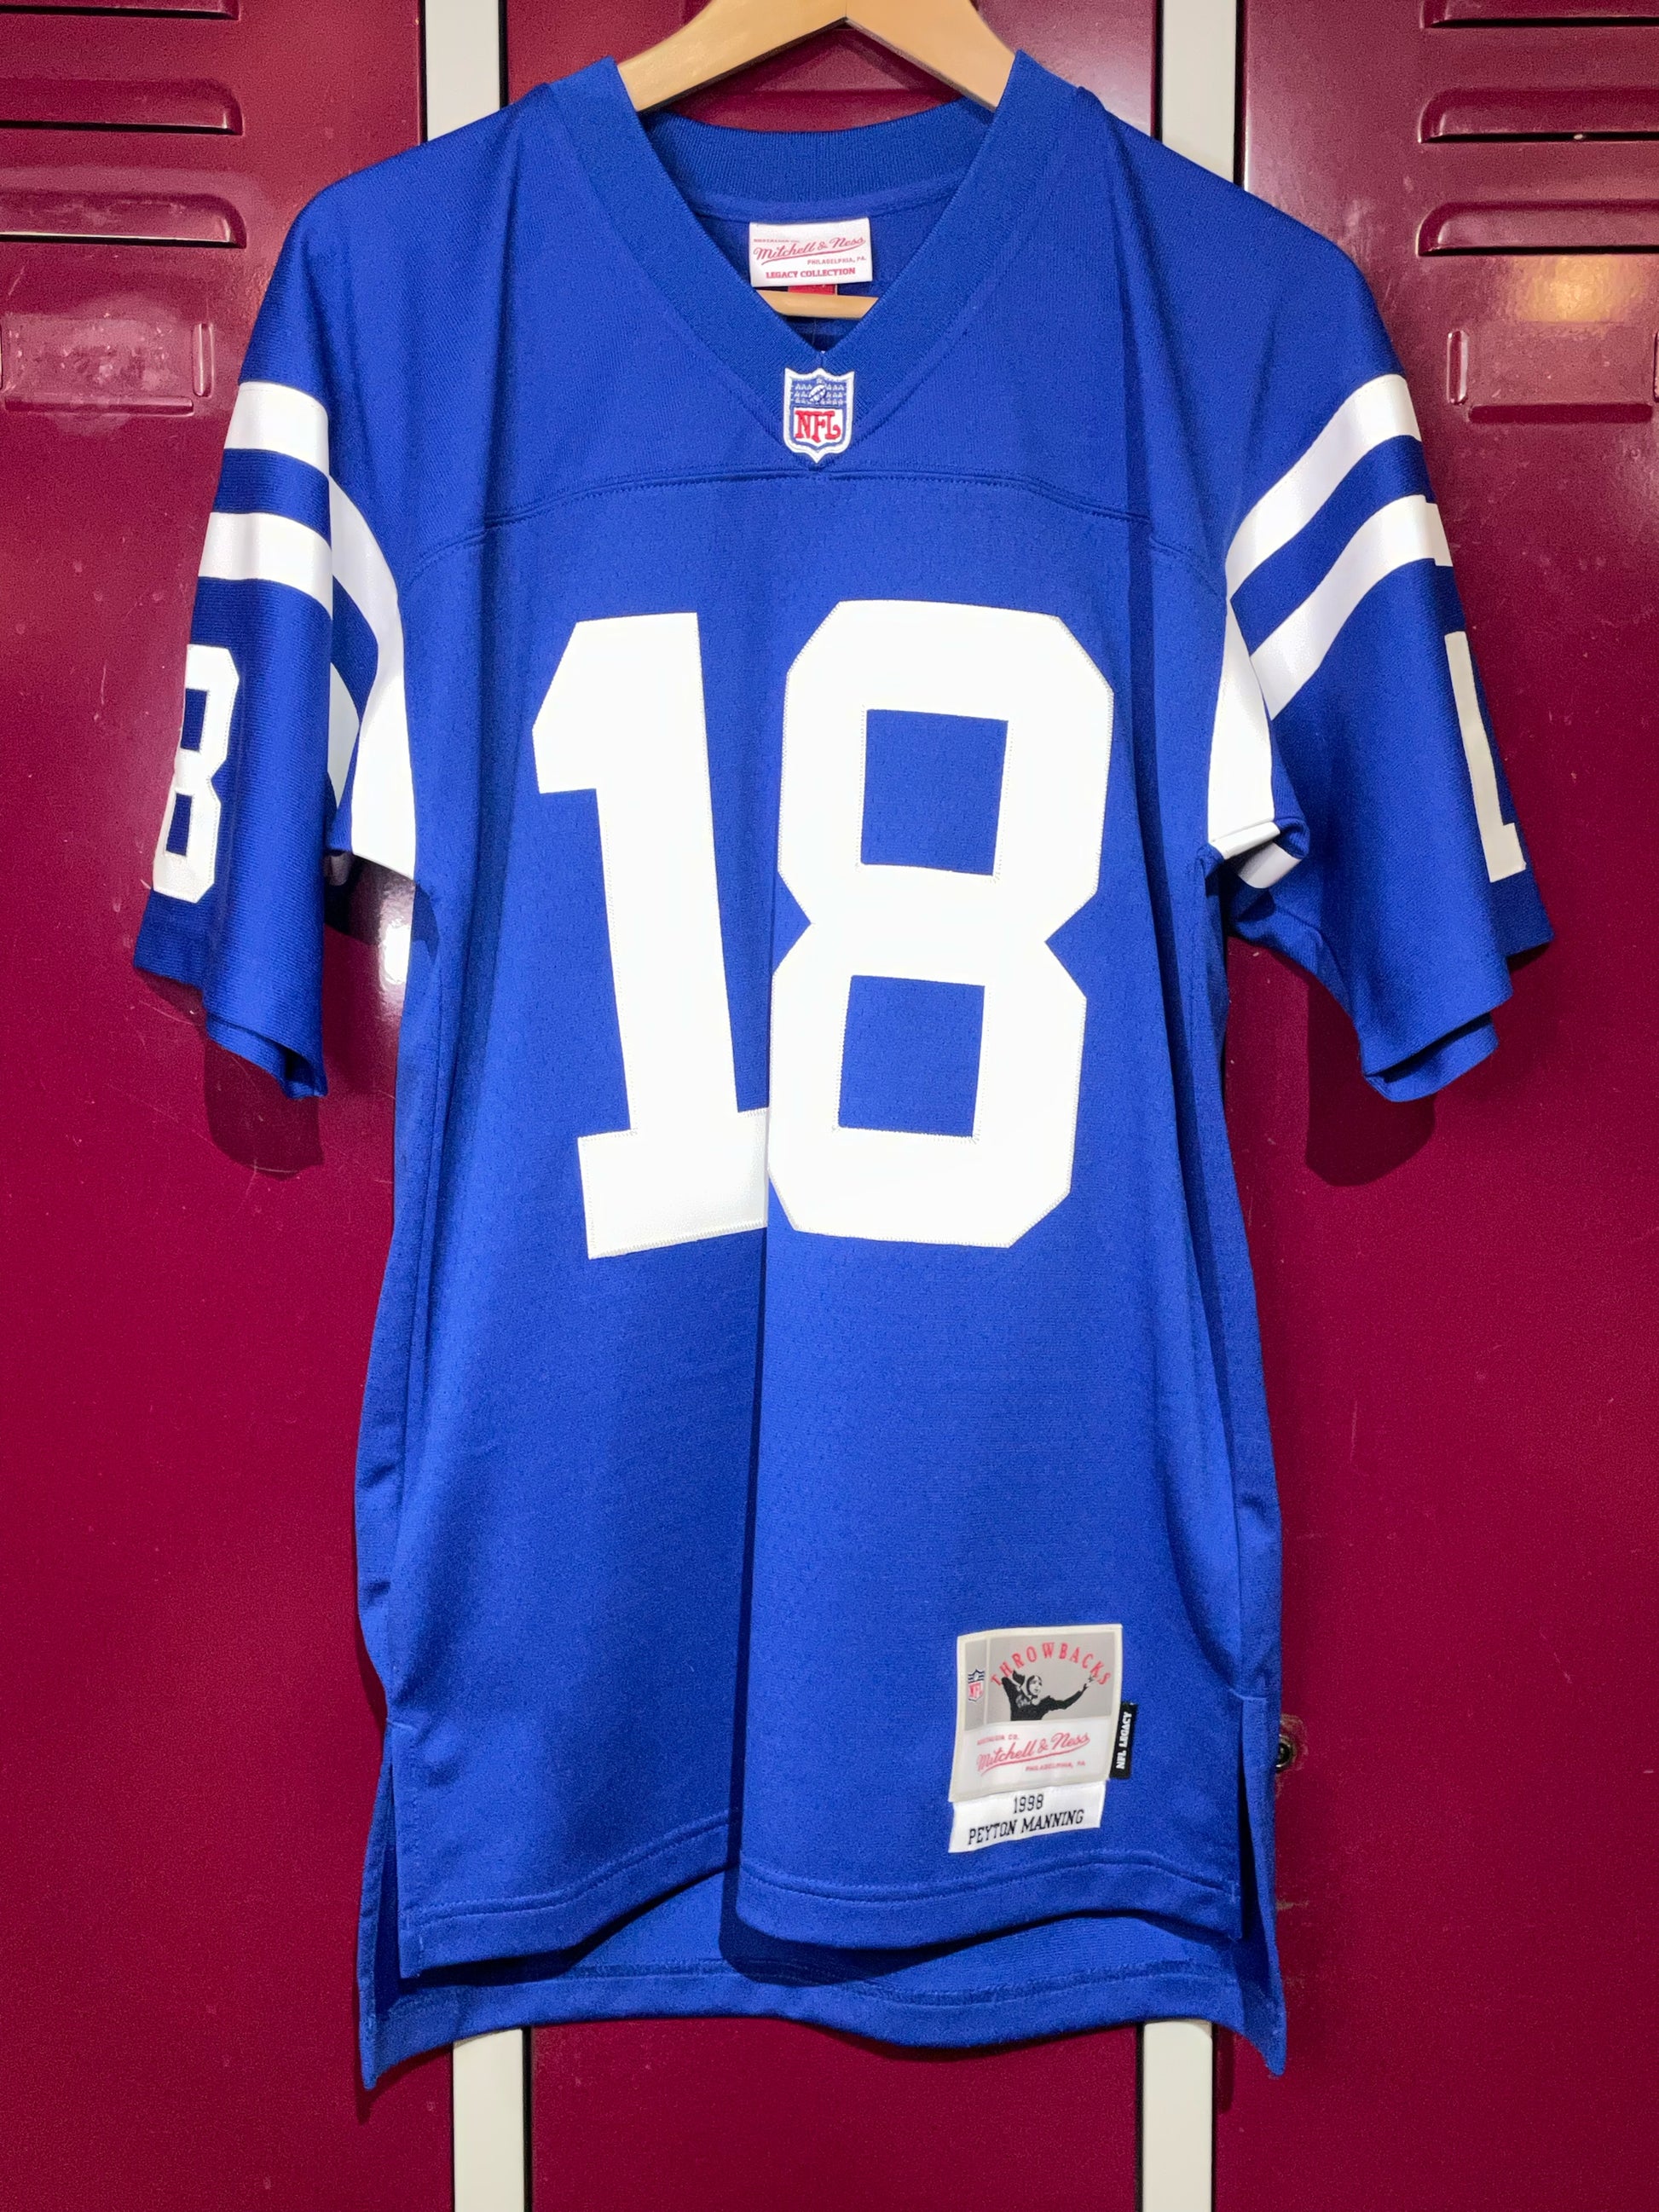 MITCHEL & NESS INDIANAPOLIS COLTS 'PEYTON MANNING' NFL FOOTBALL JERSEY –  Stay Alive vintage store